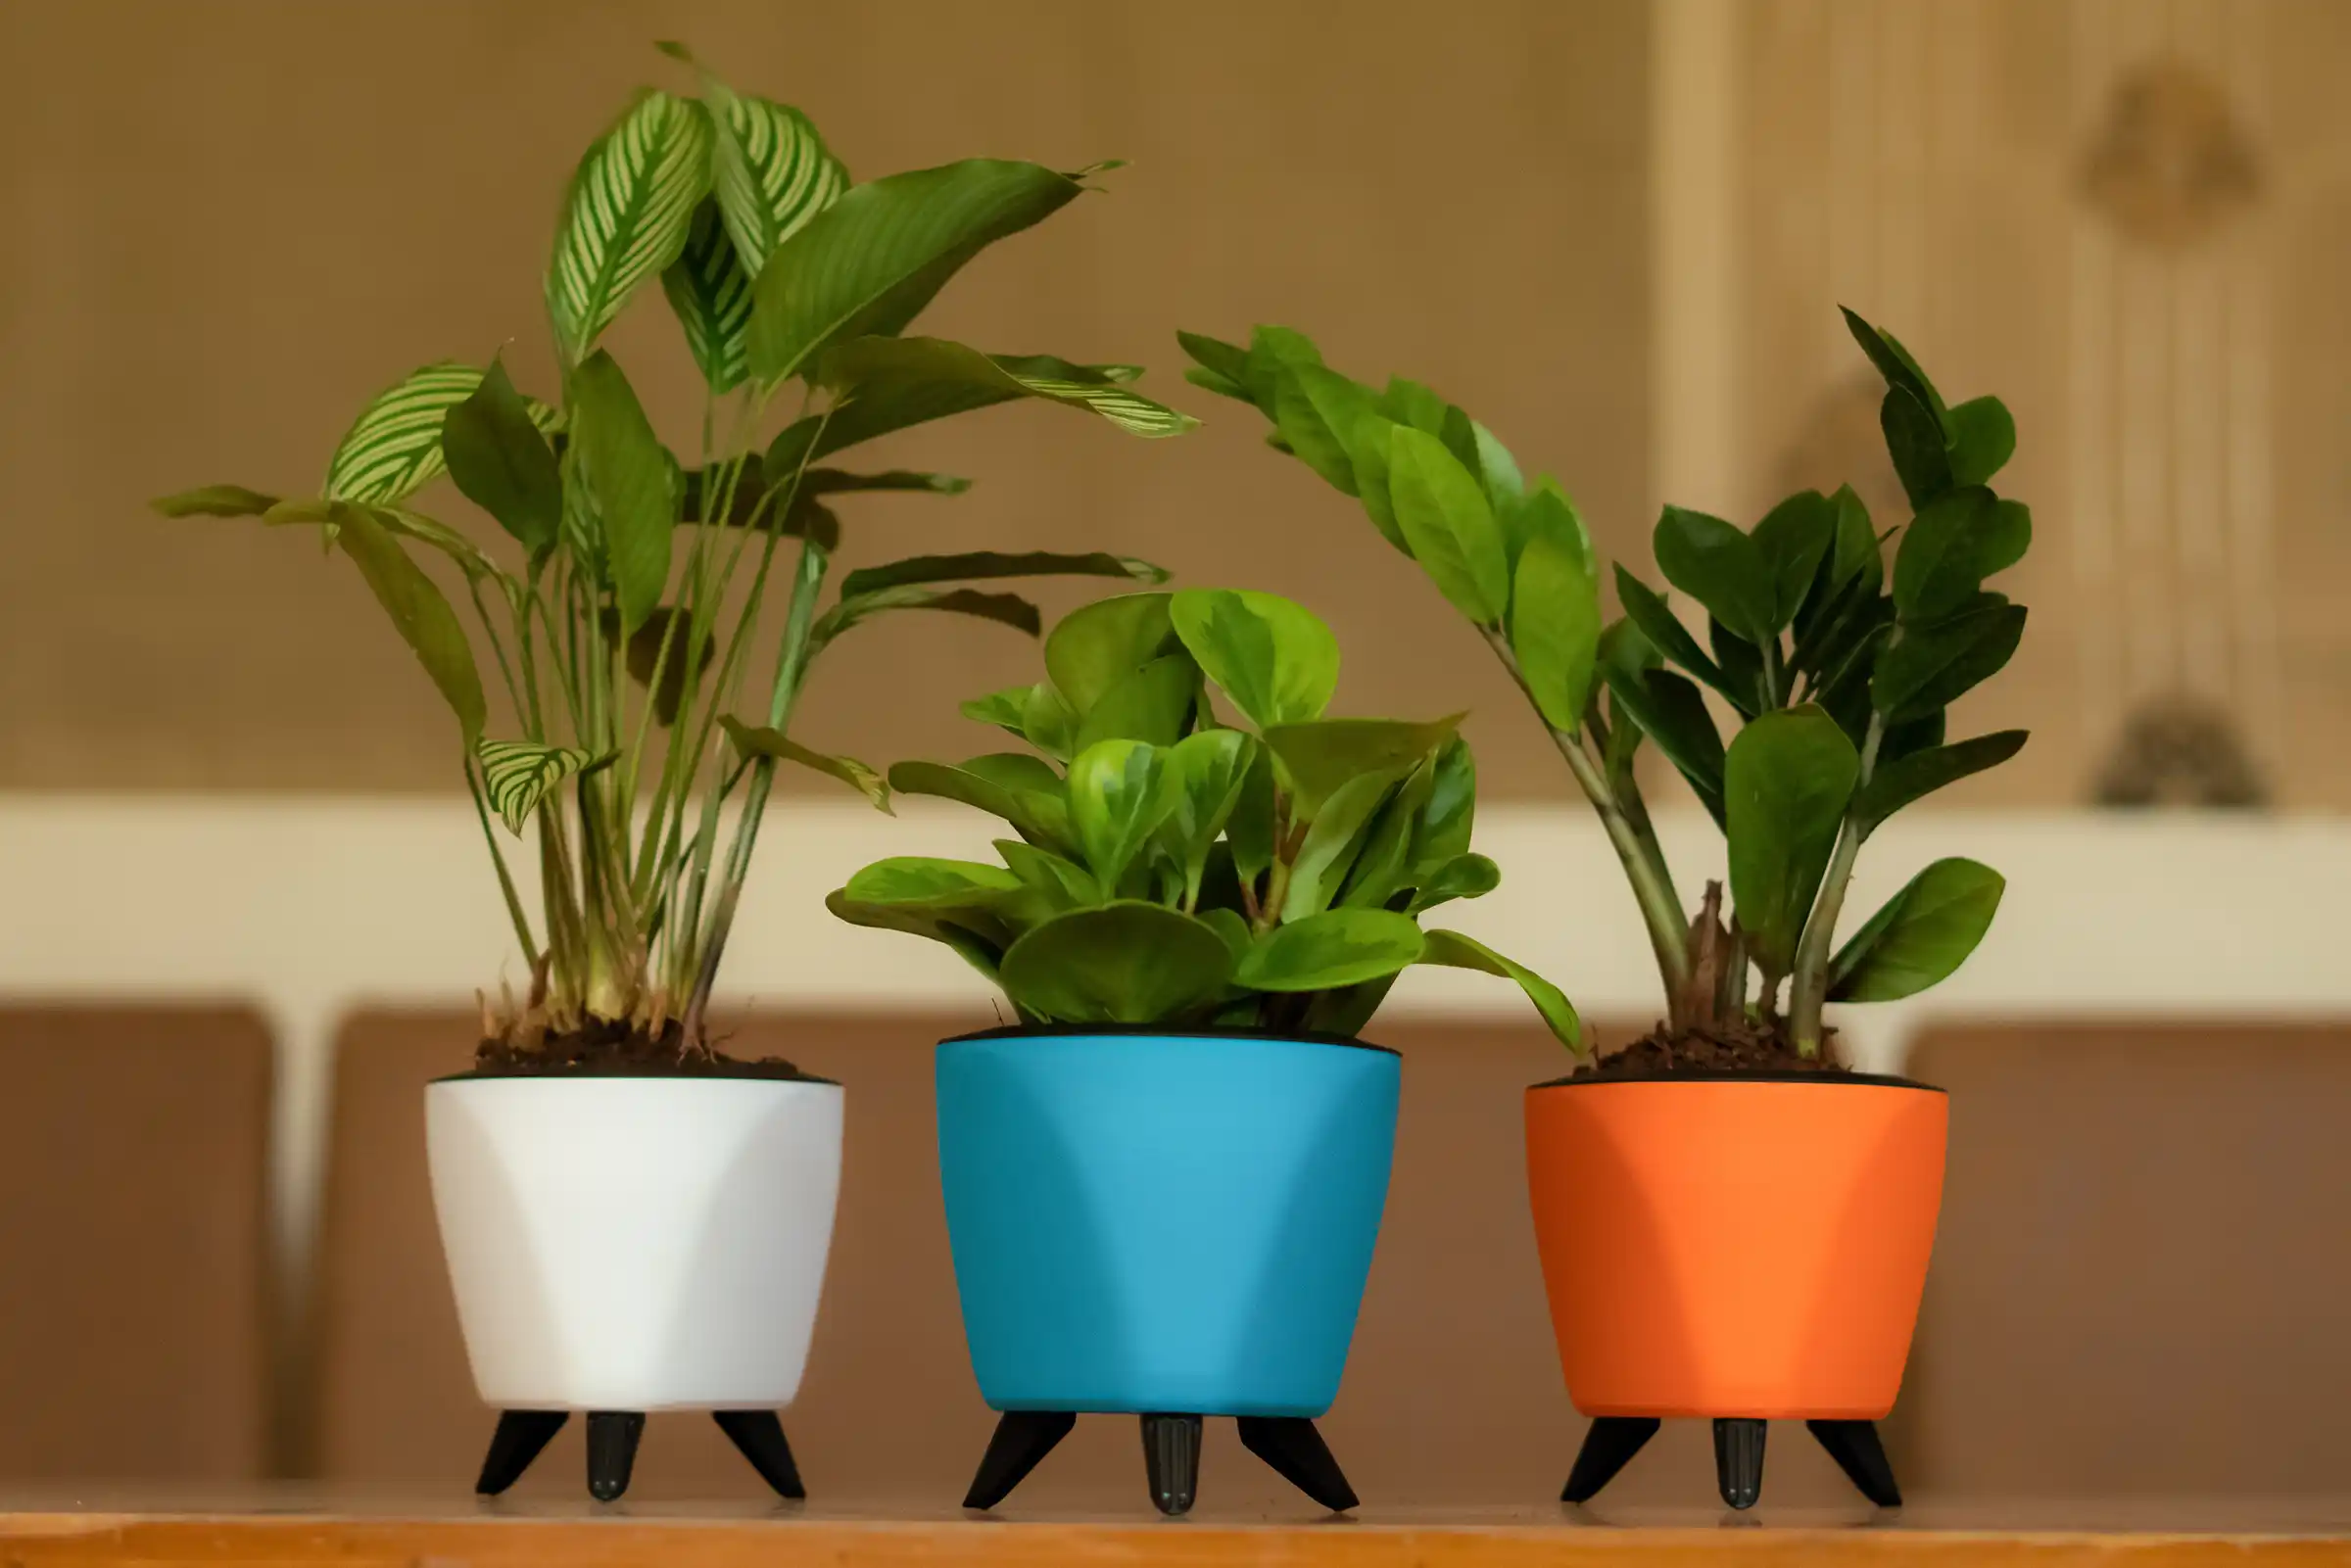 Don't let your indoor plants become a casualty of over- or under-watering, find out techniques for watering like frequency and amounts, and helpful tricks, designer pots, ceramic planters, blogs, garden planters, flower pots, plastic planter boxes, indoor planters, plastic planters, ceramic planters, indoor flower pot, indoor pots, hanging planter, wall planters, affordable plastic pot, larger decorative pot, standard indoor flower pots, decorative plastic indoor flower pots, plastic pots, plastic indoor planters, plastic pots for plants, plastic pots wholesale, plastic pots garden, plastic pots for plants online, plastic pots manufacturers, plastic pots online, plastic pots amazon, plastic pots manufacturers in Mumbai, plastic pots online India, indoor decor pots, decorative indoor planters, indoor planters decoration, decorative indoor flower pots, wall decorative plants, home decoration pot, home decor pots, indoor decorative pots for plants, indoor pots ideas, indoor plants decorative pots, decorative indoor pots and vases, best indoor plants for tall planters, harshdeep, pot manufacturers, pot wholesalers, flower pots, table planters, balcony planters, affordable pots, buy pots online, best pot manufacturers